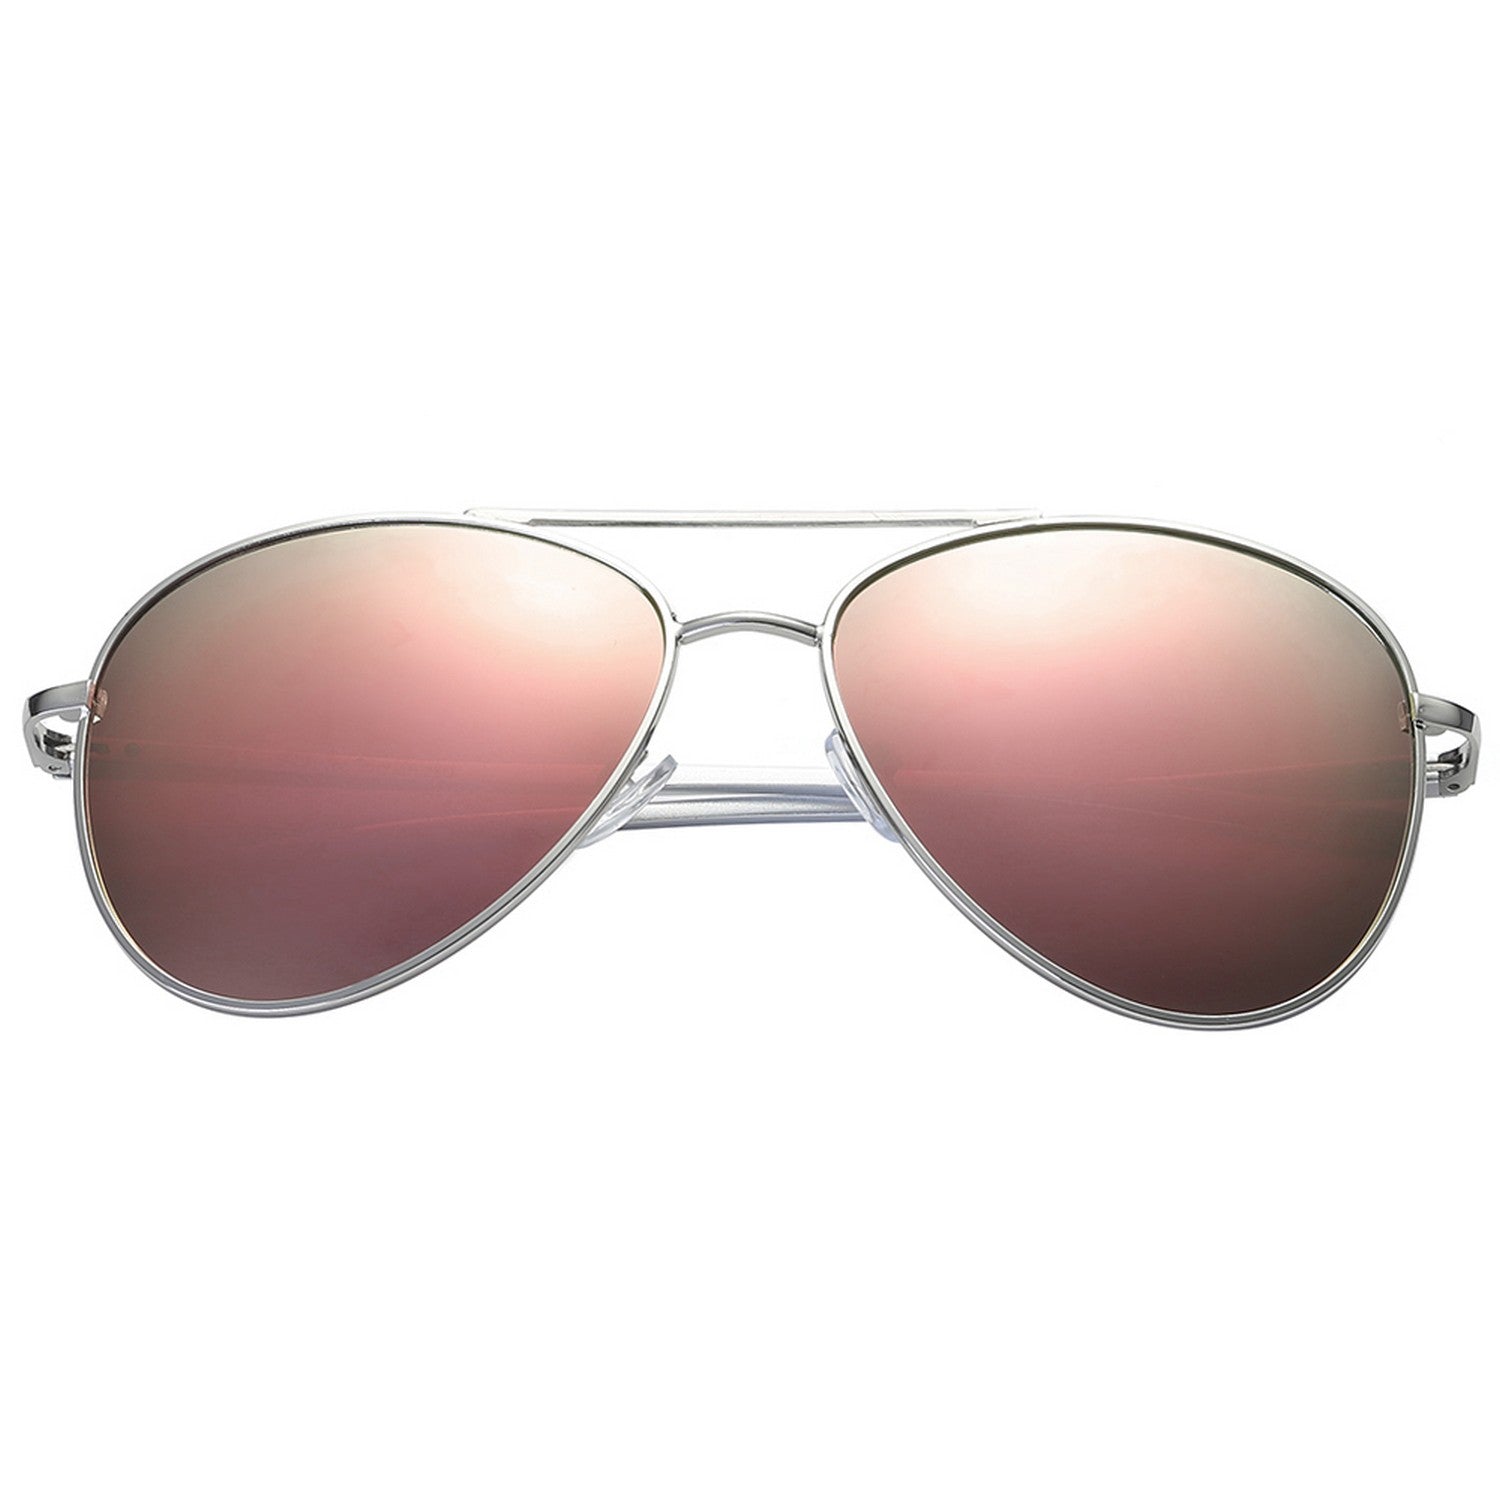 Polarspex Polarized Aviator Style Sunglasses with Aluminum Silver Frames and Polarized Pink Quartz Lenses for Men and Women